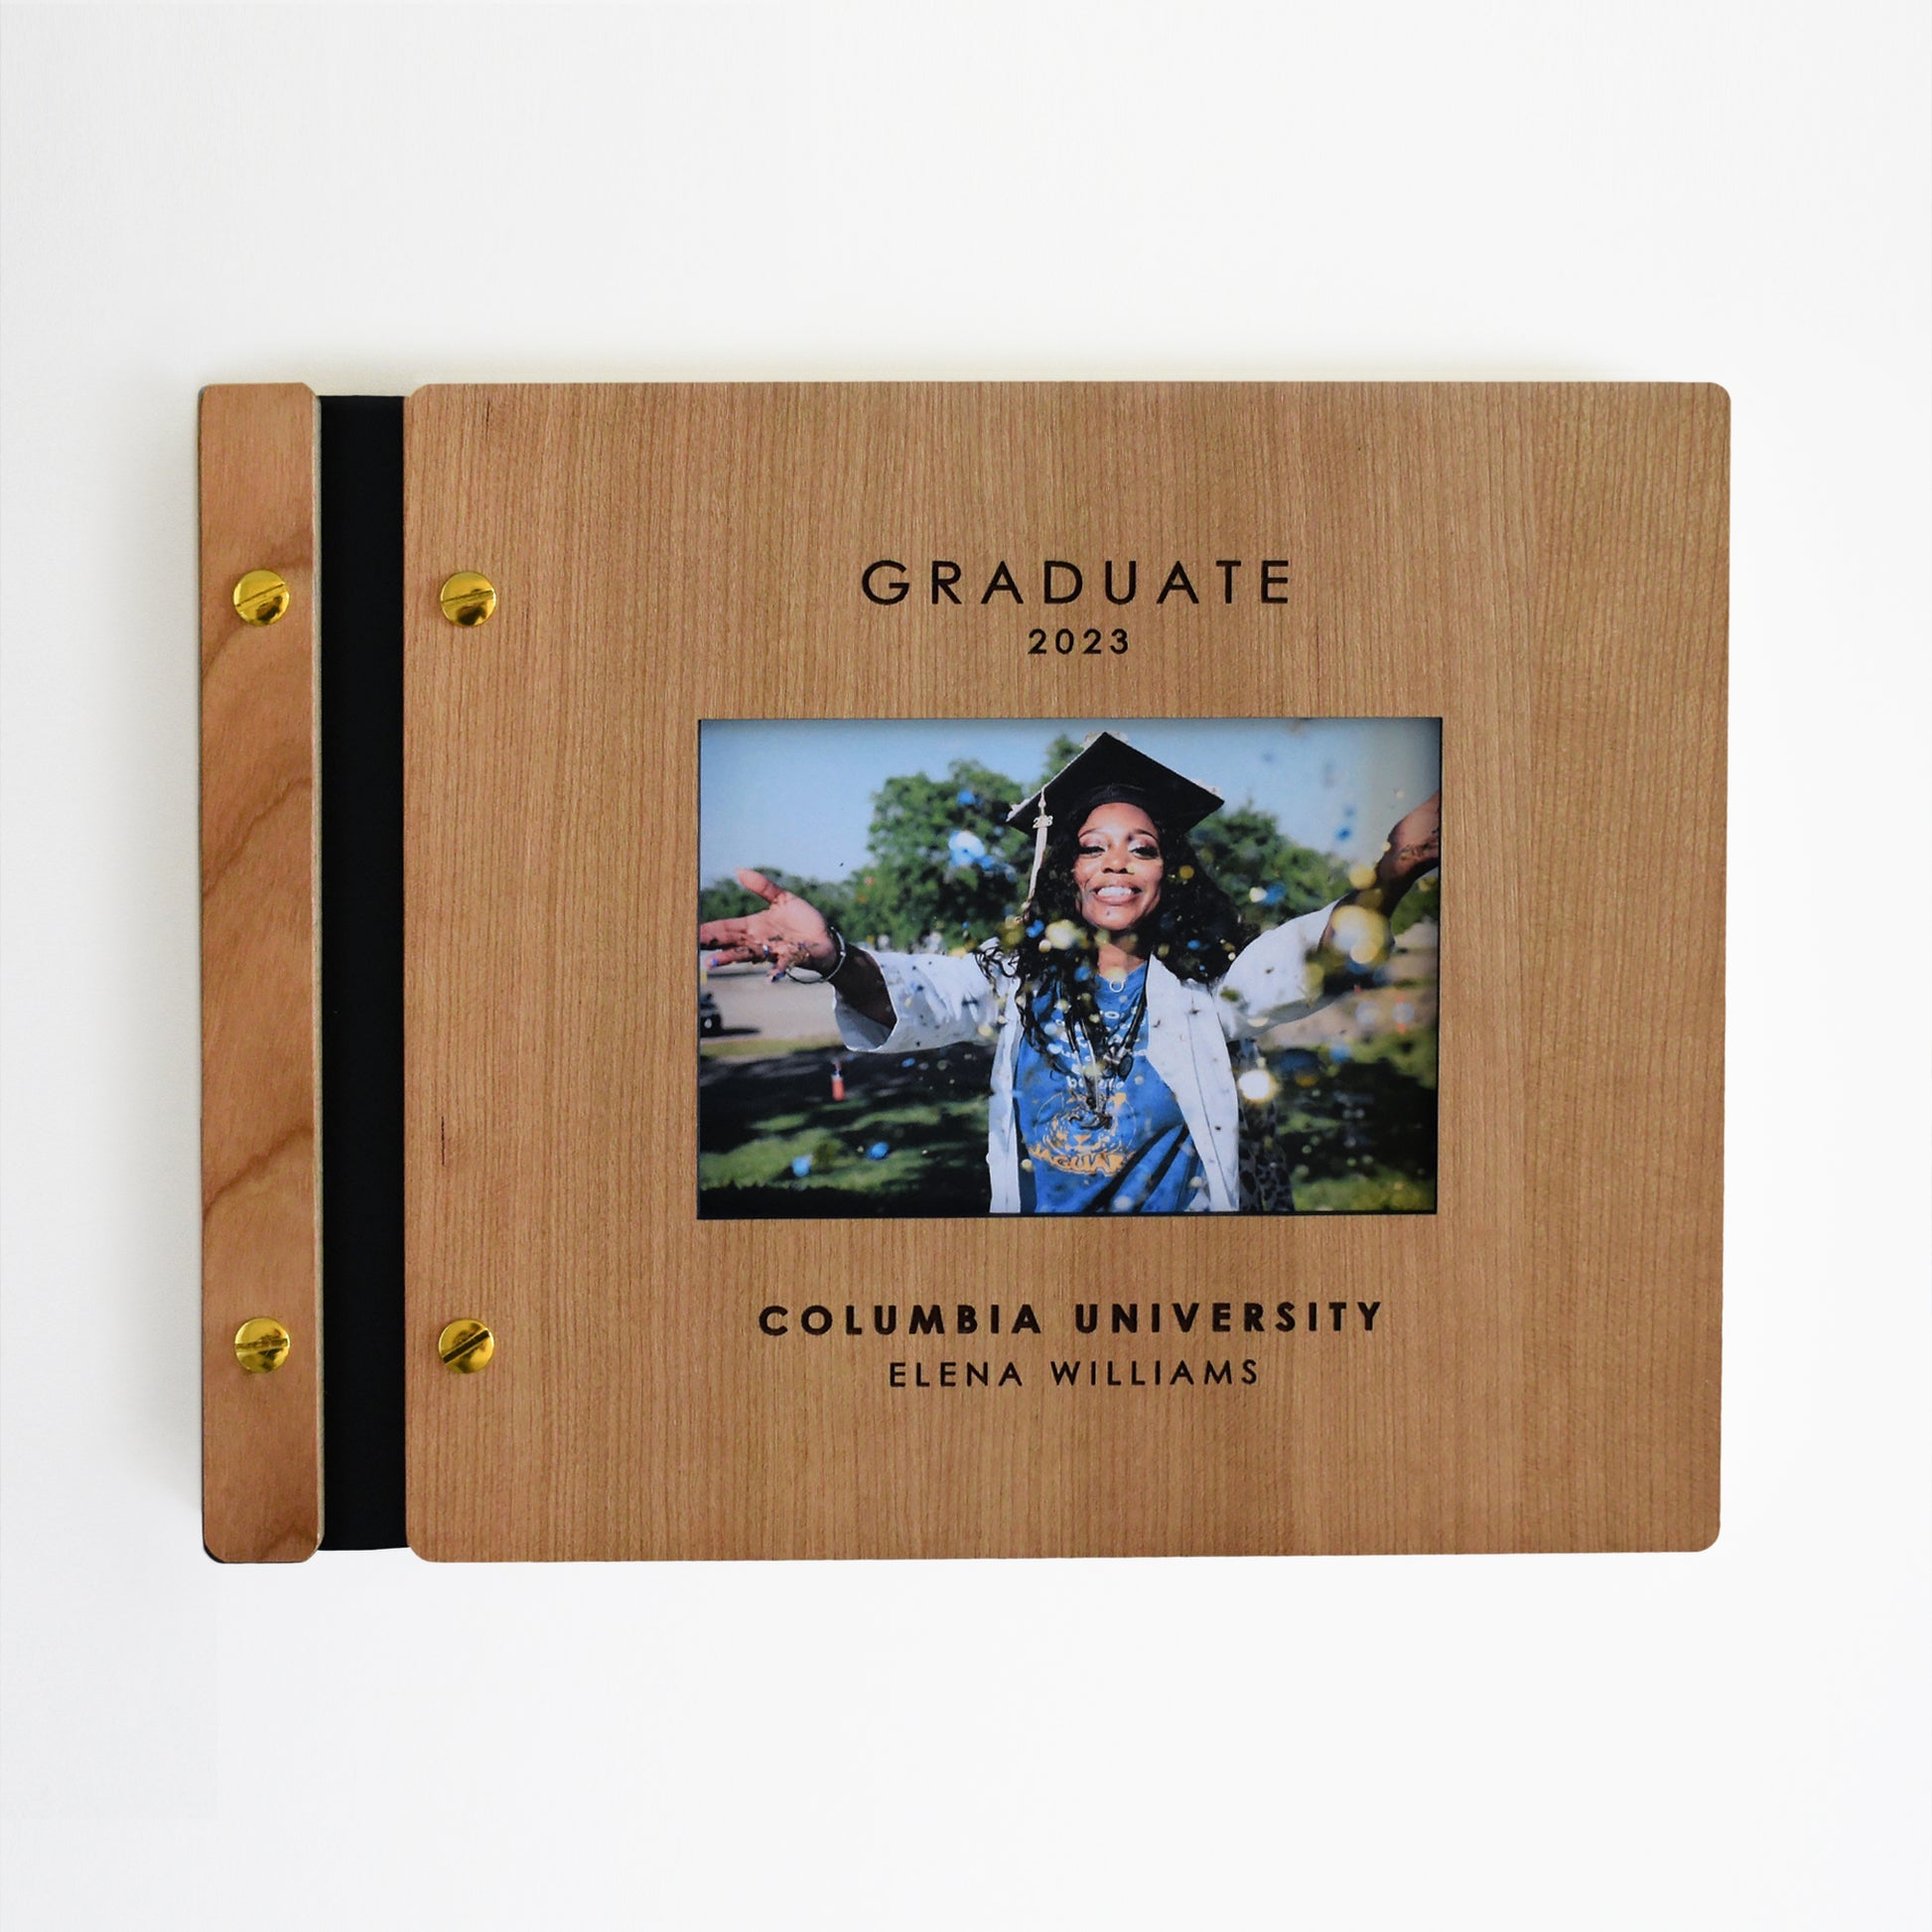 An 8.5x11" sized guest book stands on a table with a white background. The graduation guest book is made from cherry wood, black vegan leather, and gold hardware. This is the perfect addition to a photo booth or polaroid table for guests to sign and post polaroid photos in!